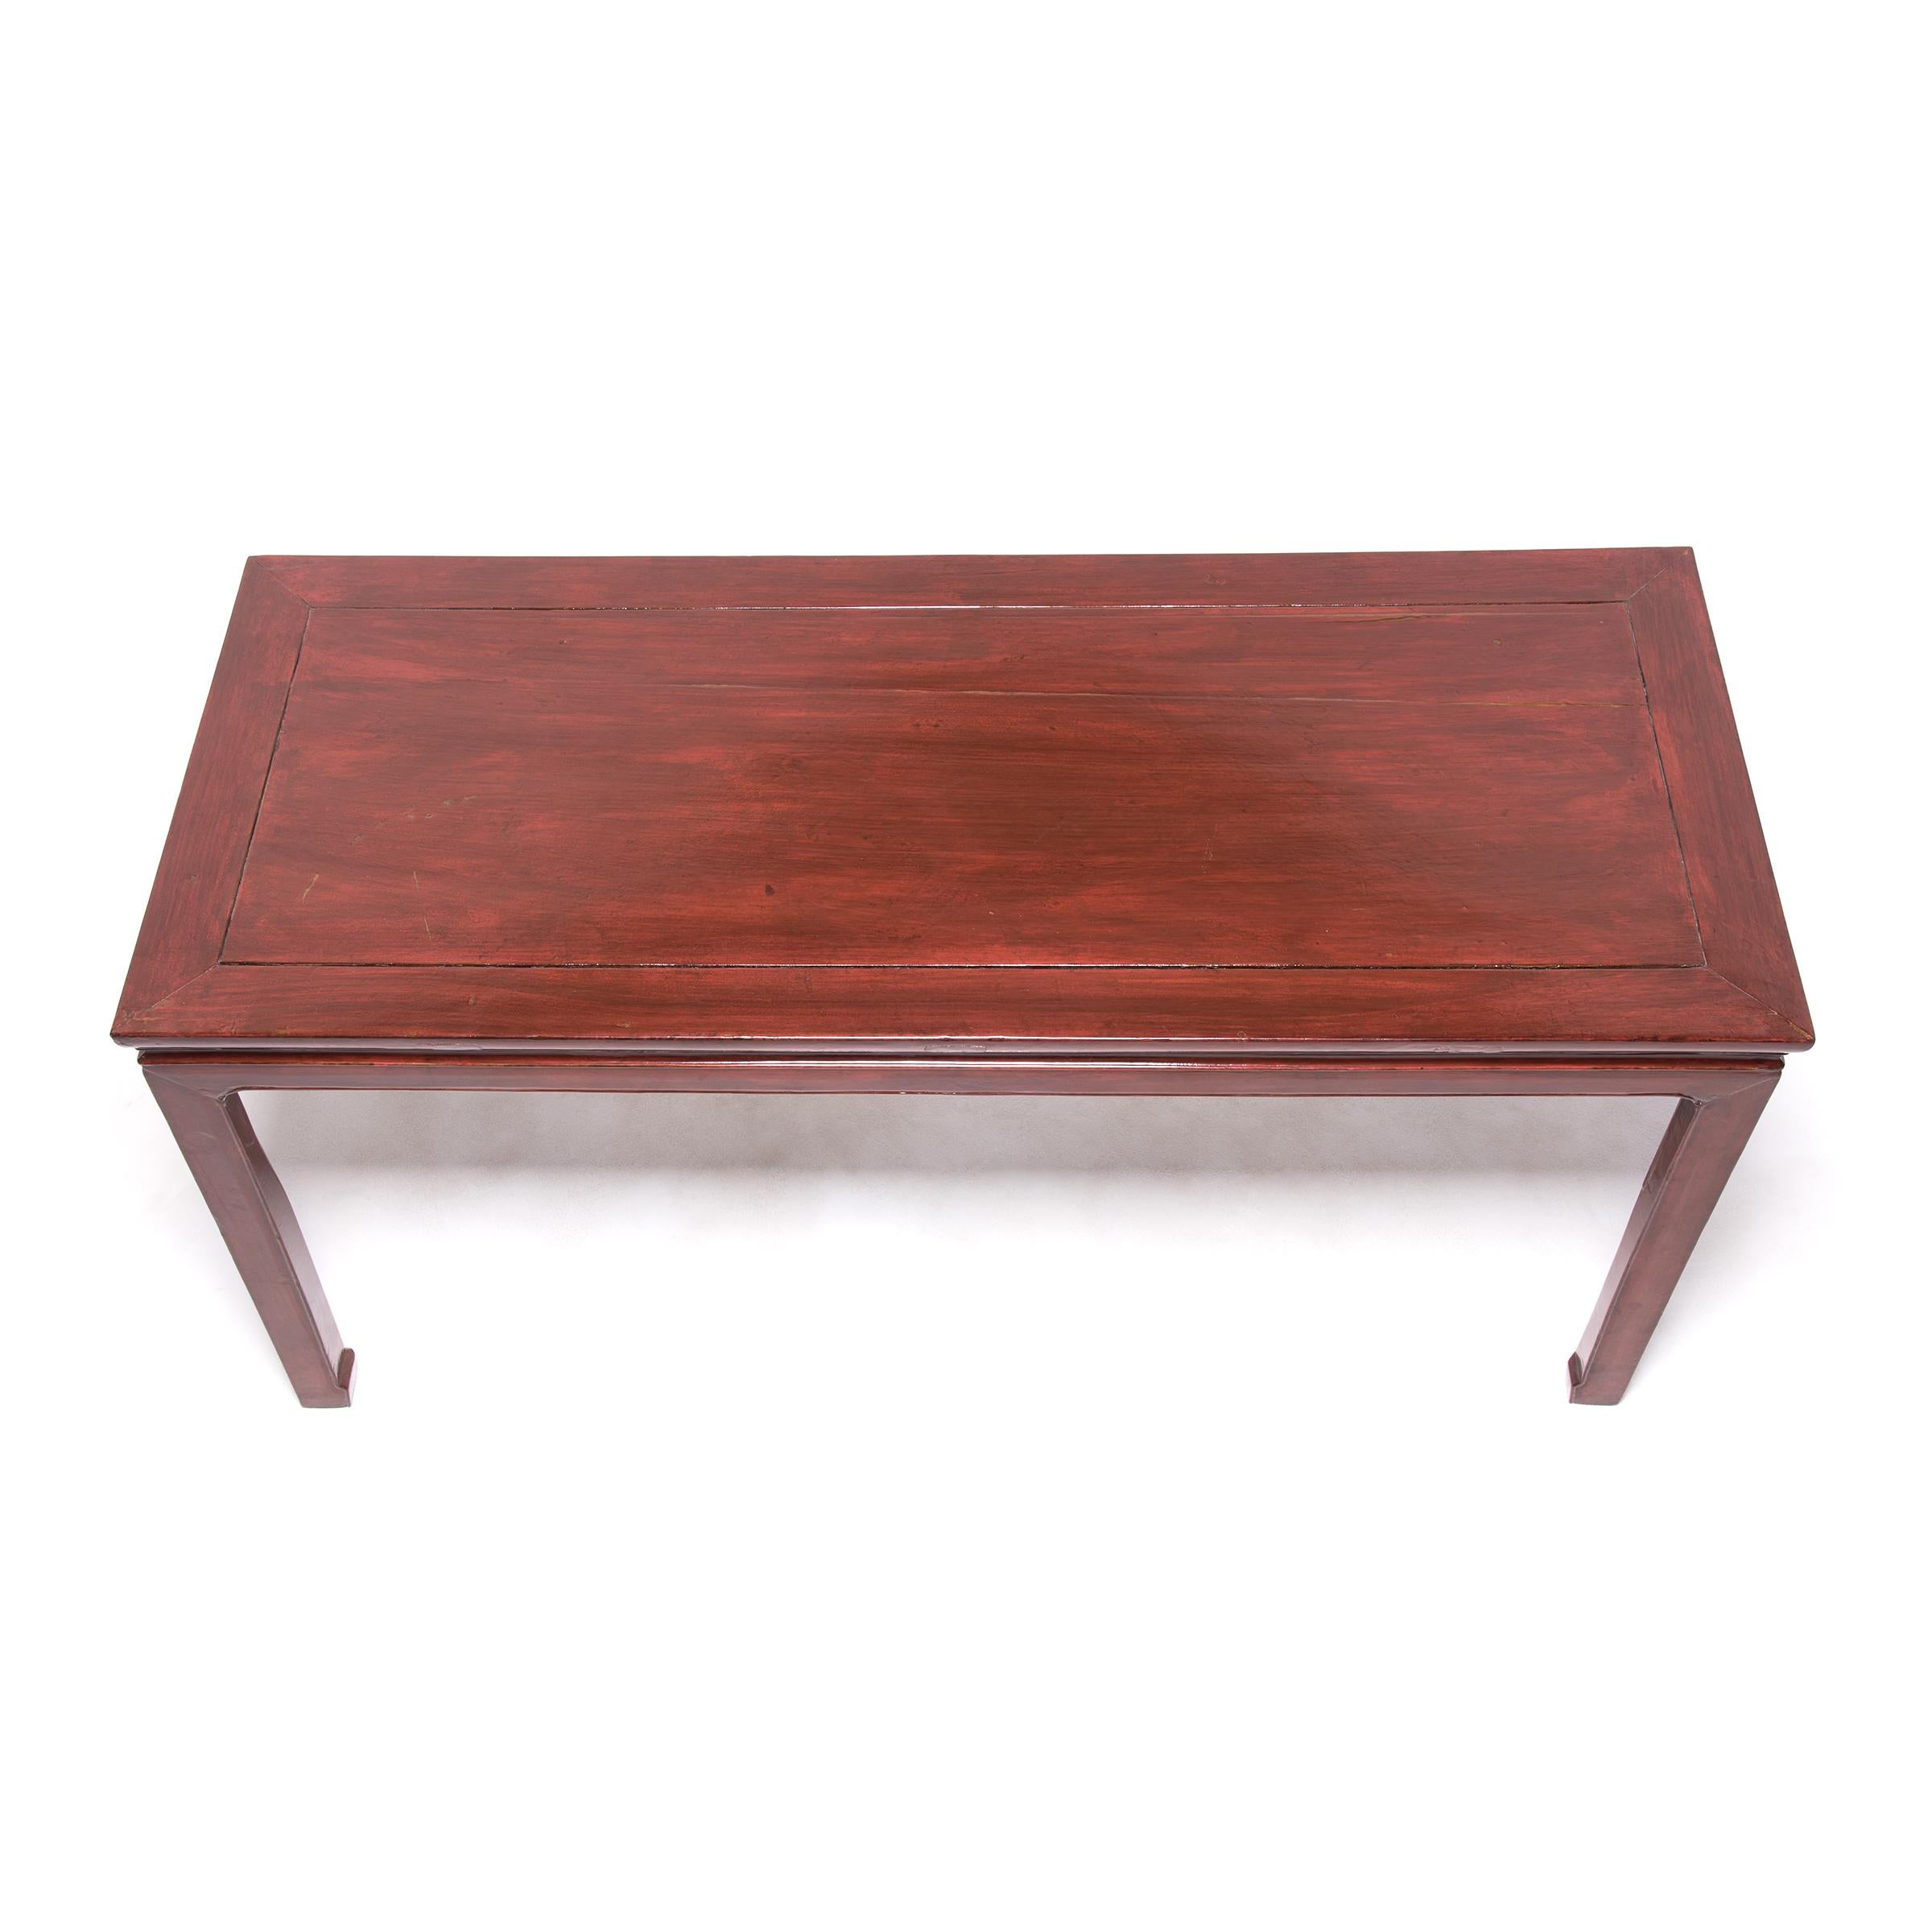 Minimalist Chinese Red Lacquer Painting Table, c. 1900 For Sale